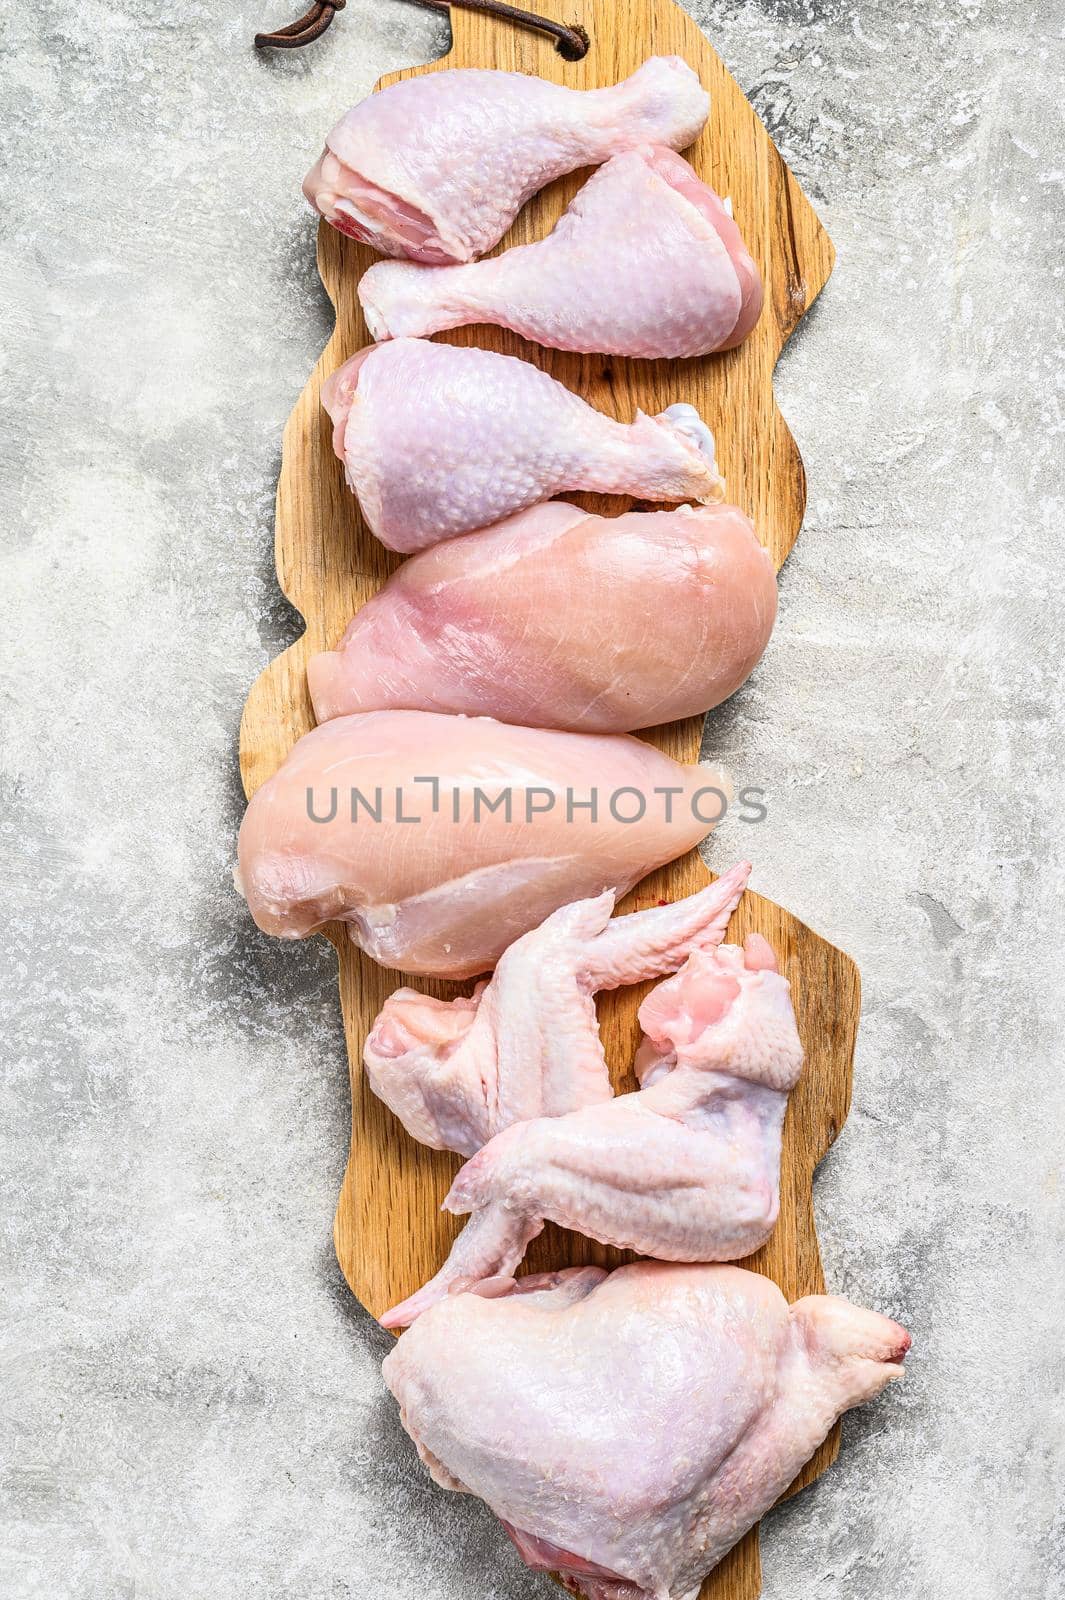 Raw uncooked chicken meat on a cutting board. Gray background. Top view.